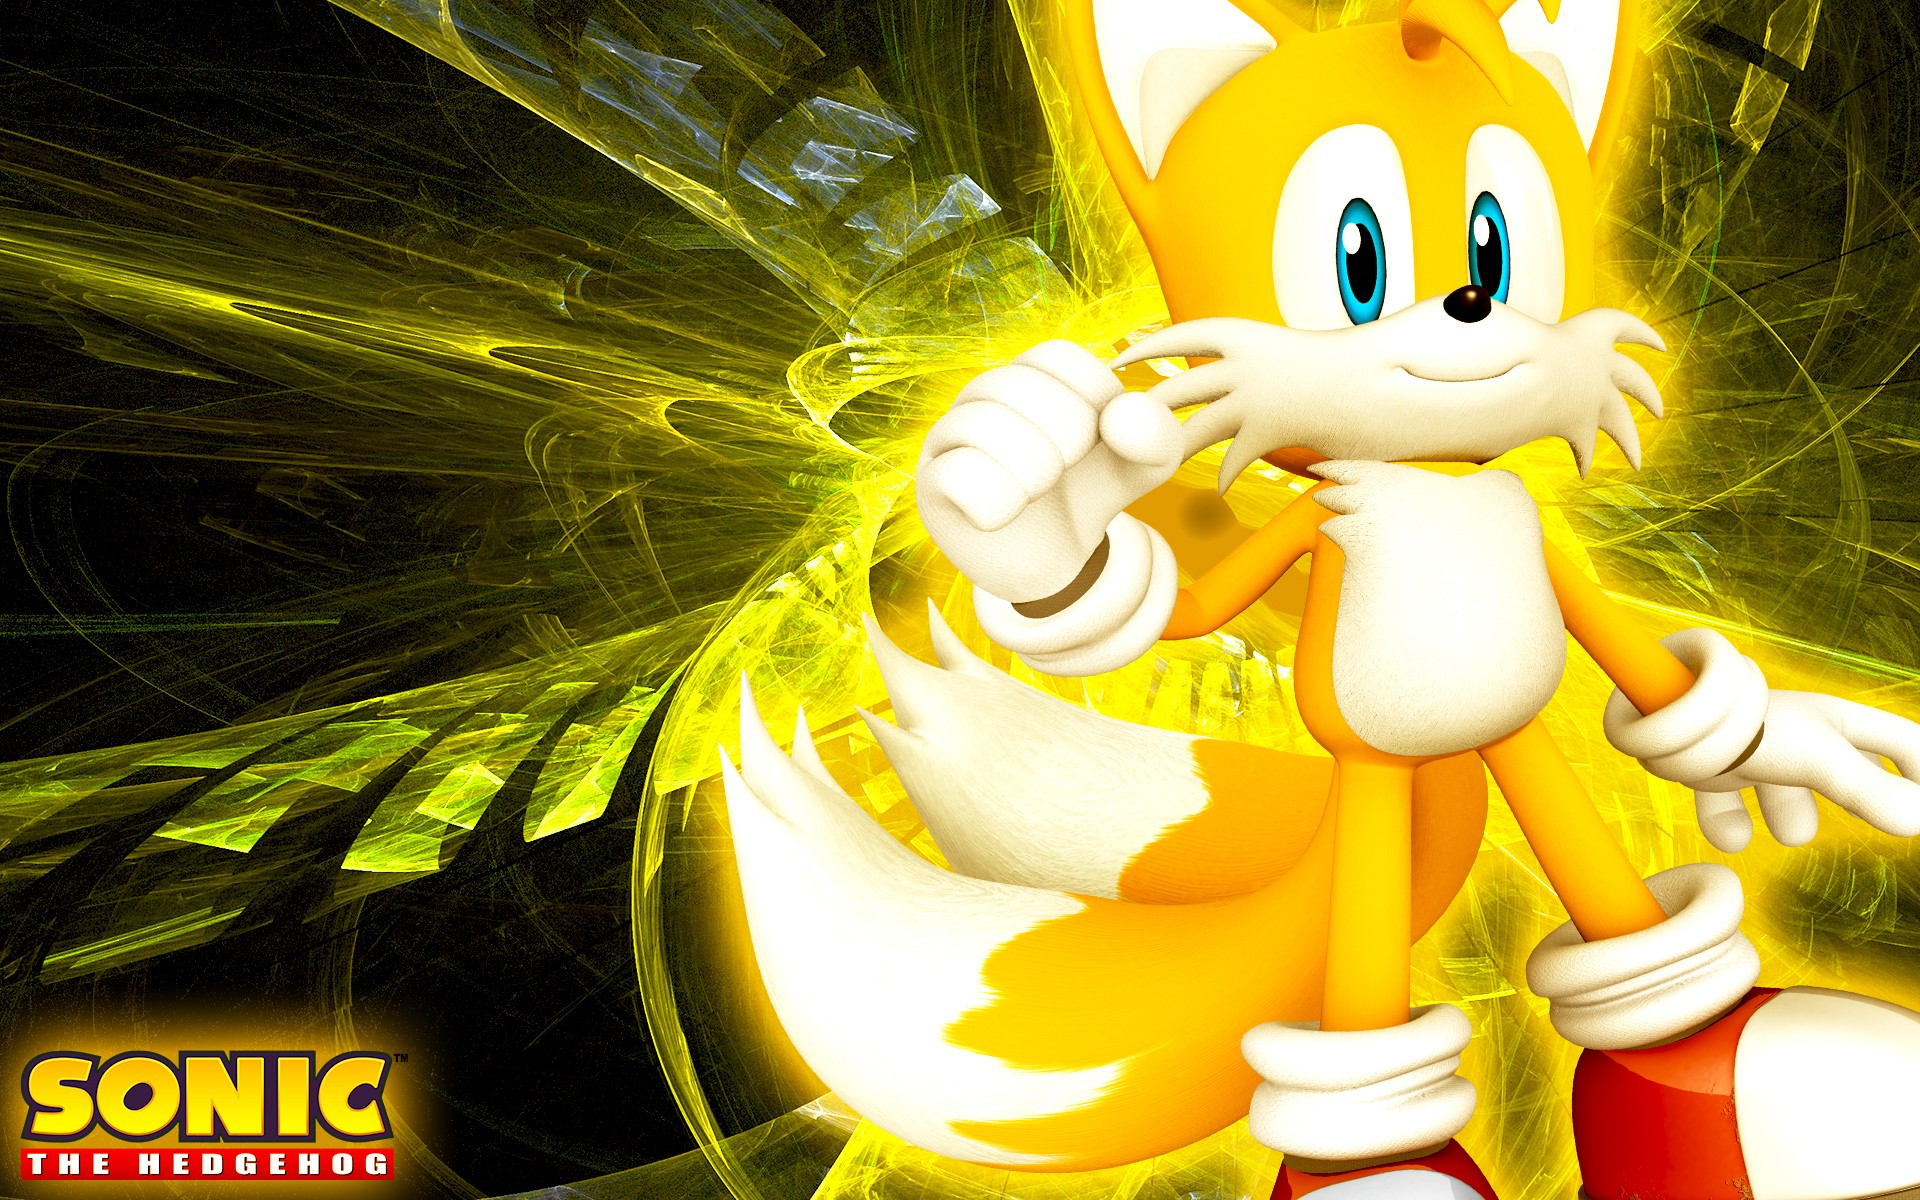 Sonic 2020 Tails